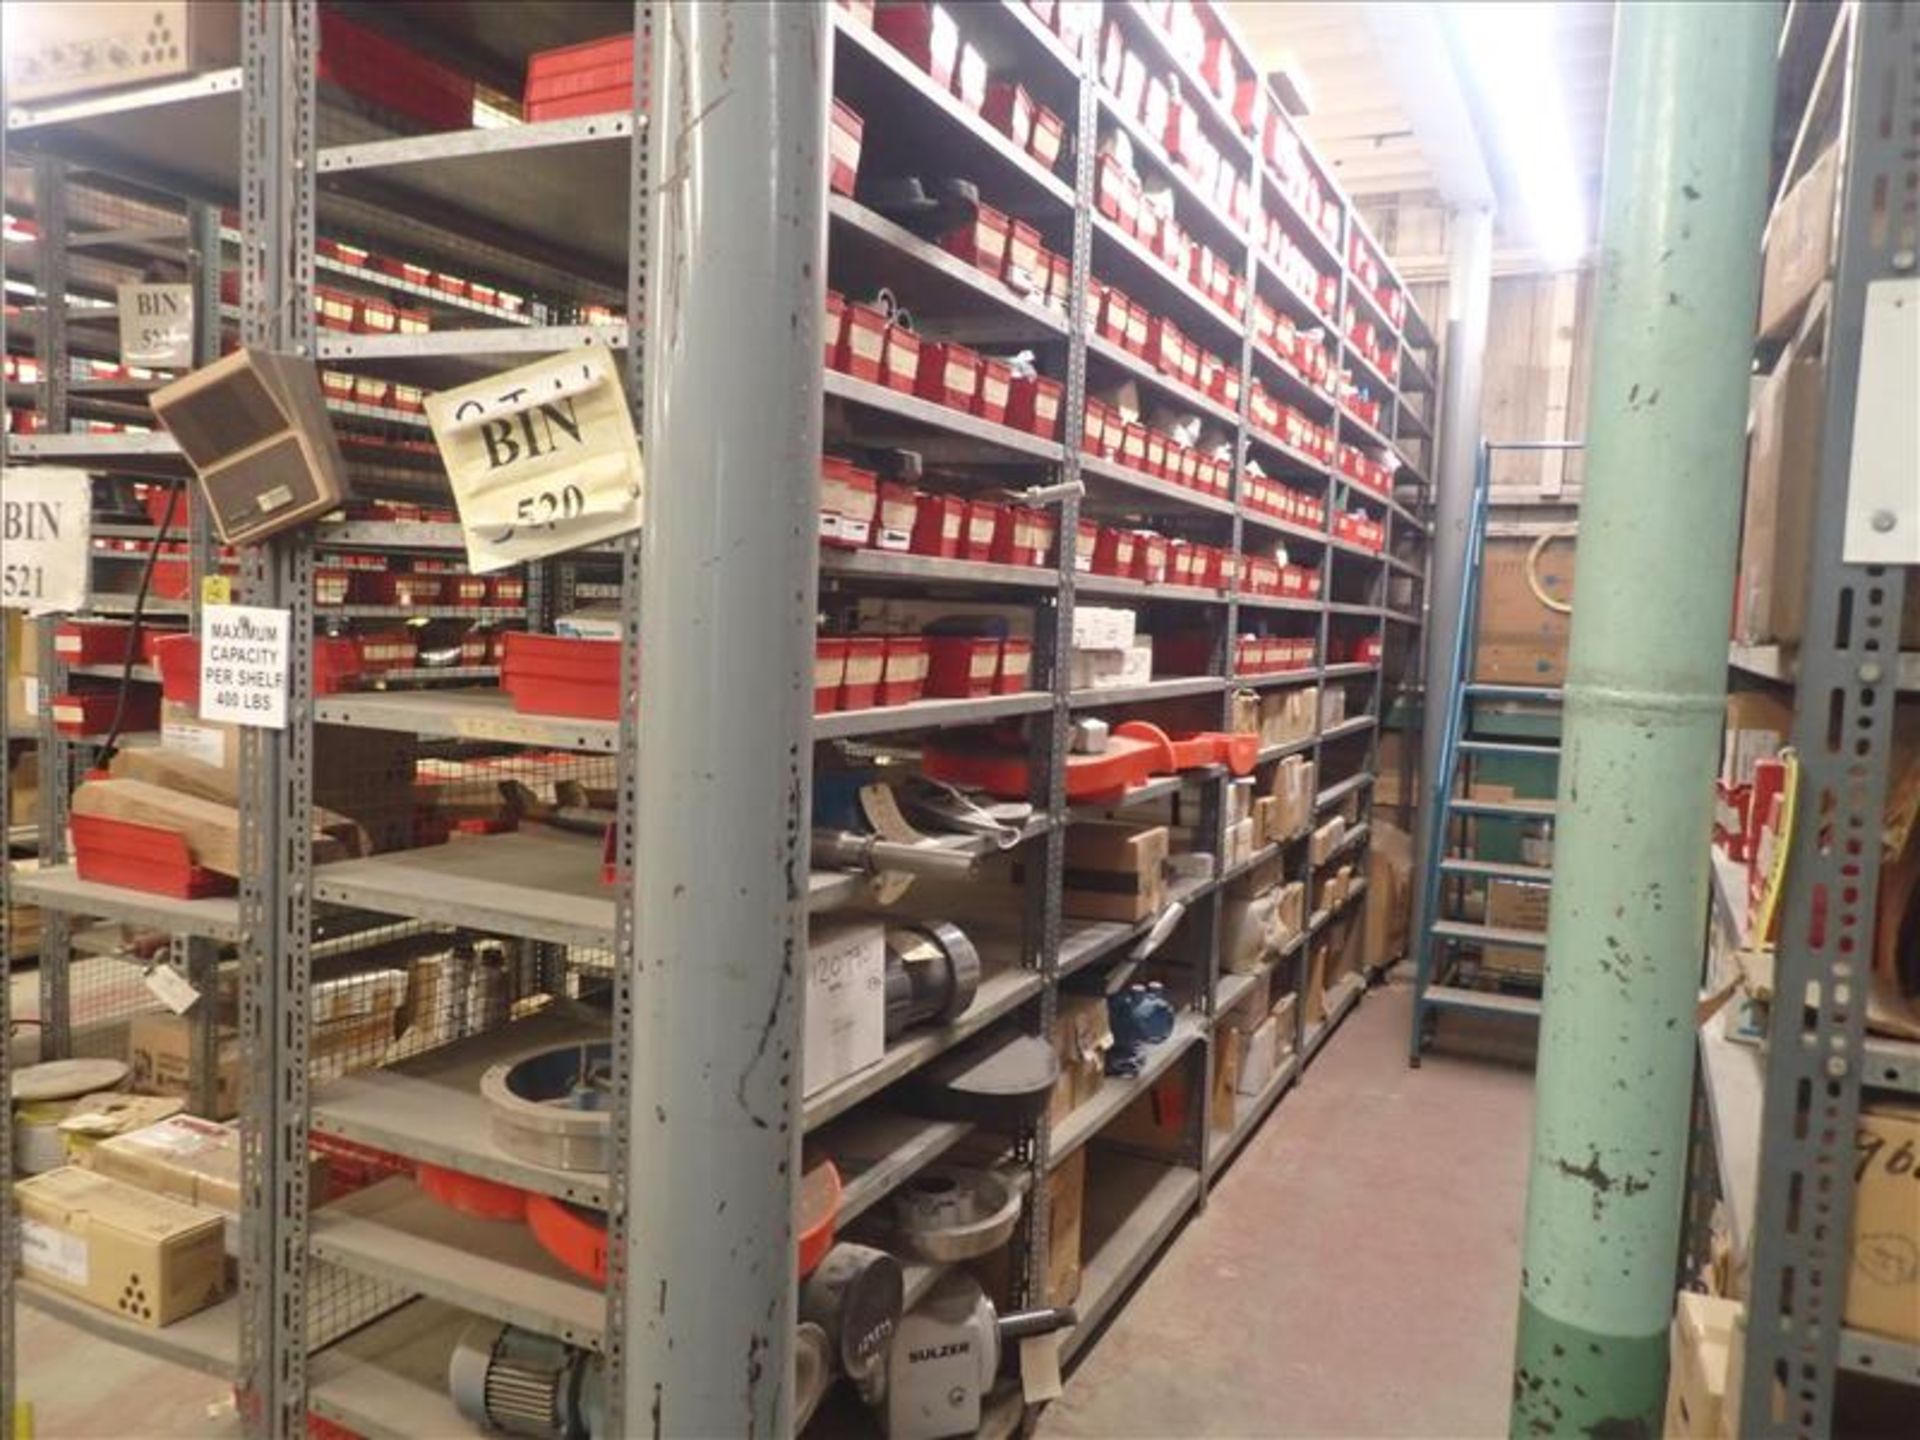 contents of shelving: relays, sensors, liners, spare parts, etc. (Bin 520) (Tag 8015 Loc WH South)